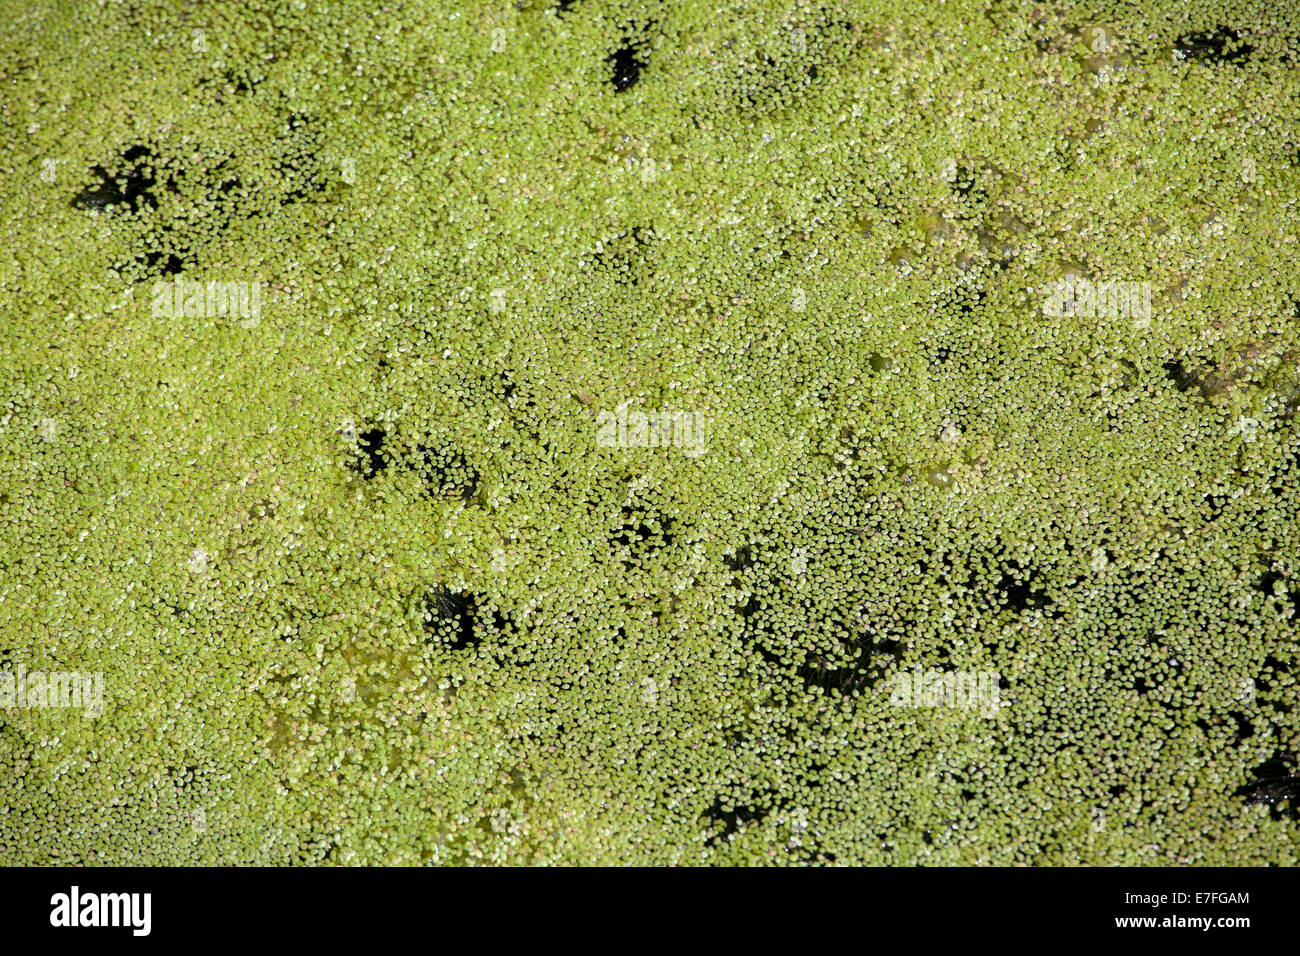 Green duckweed in dead-water of a lake Stock Photo